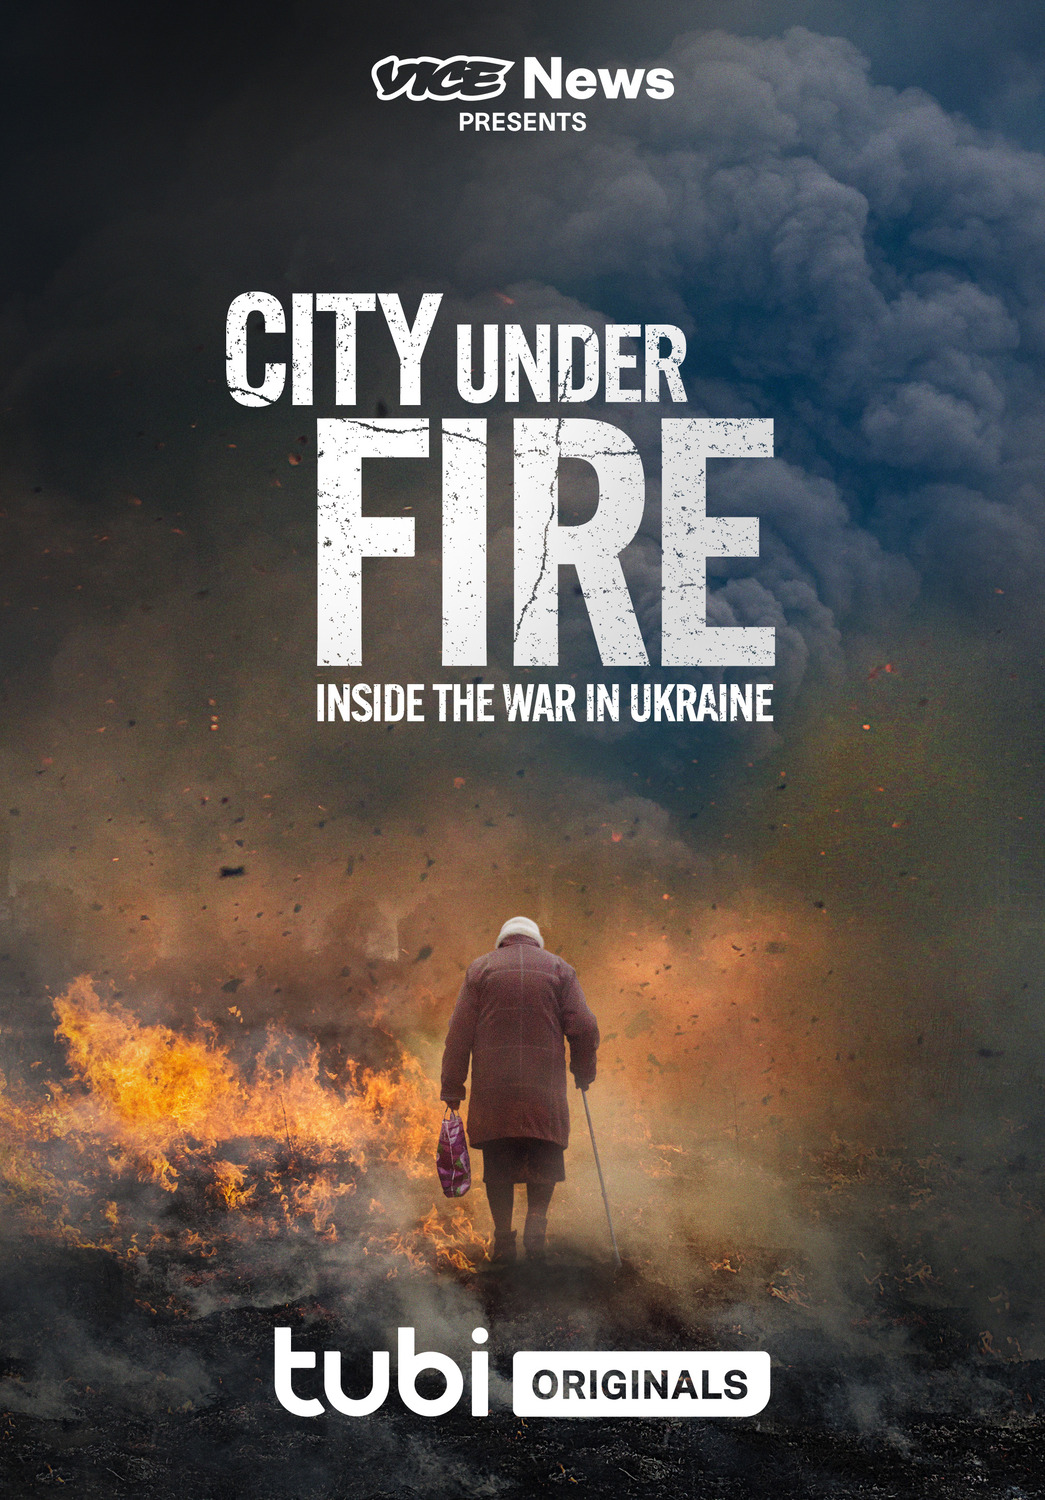 Extra Large Movie Poster Image for City Under Fire: Inside the War in Ukraine 